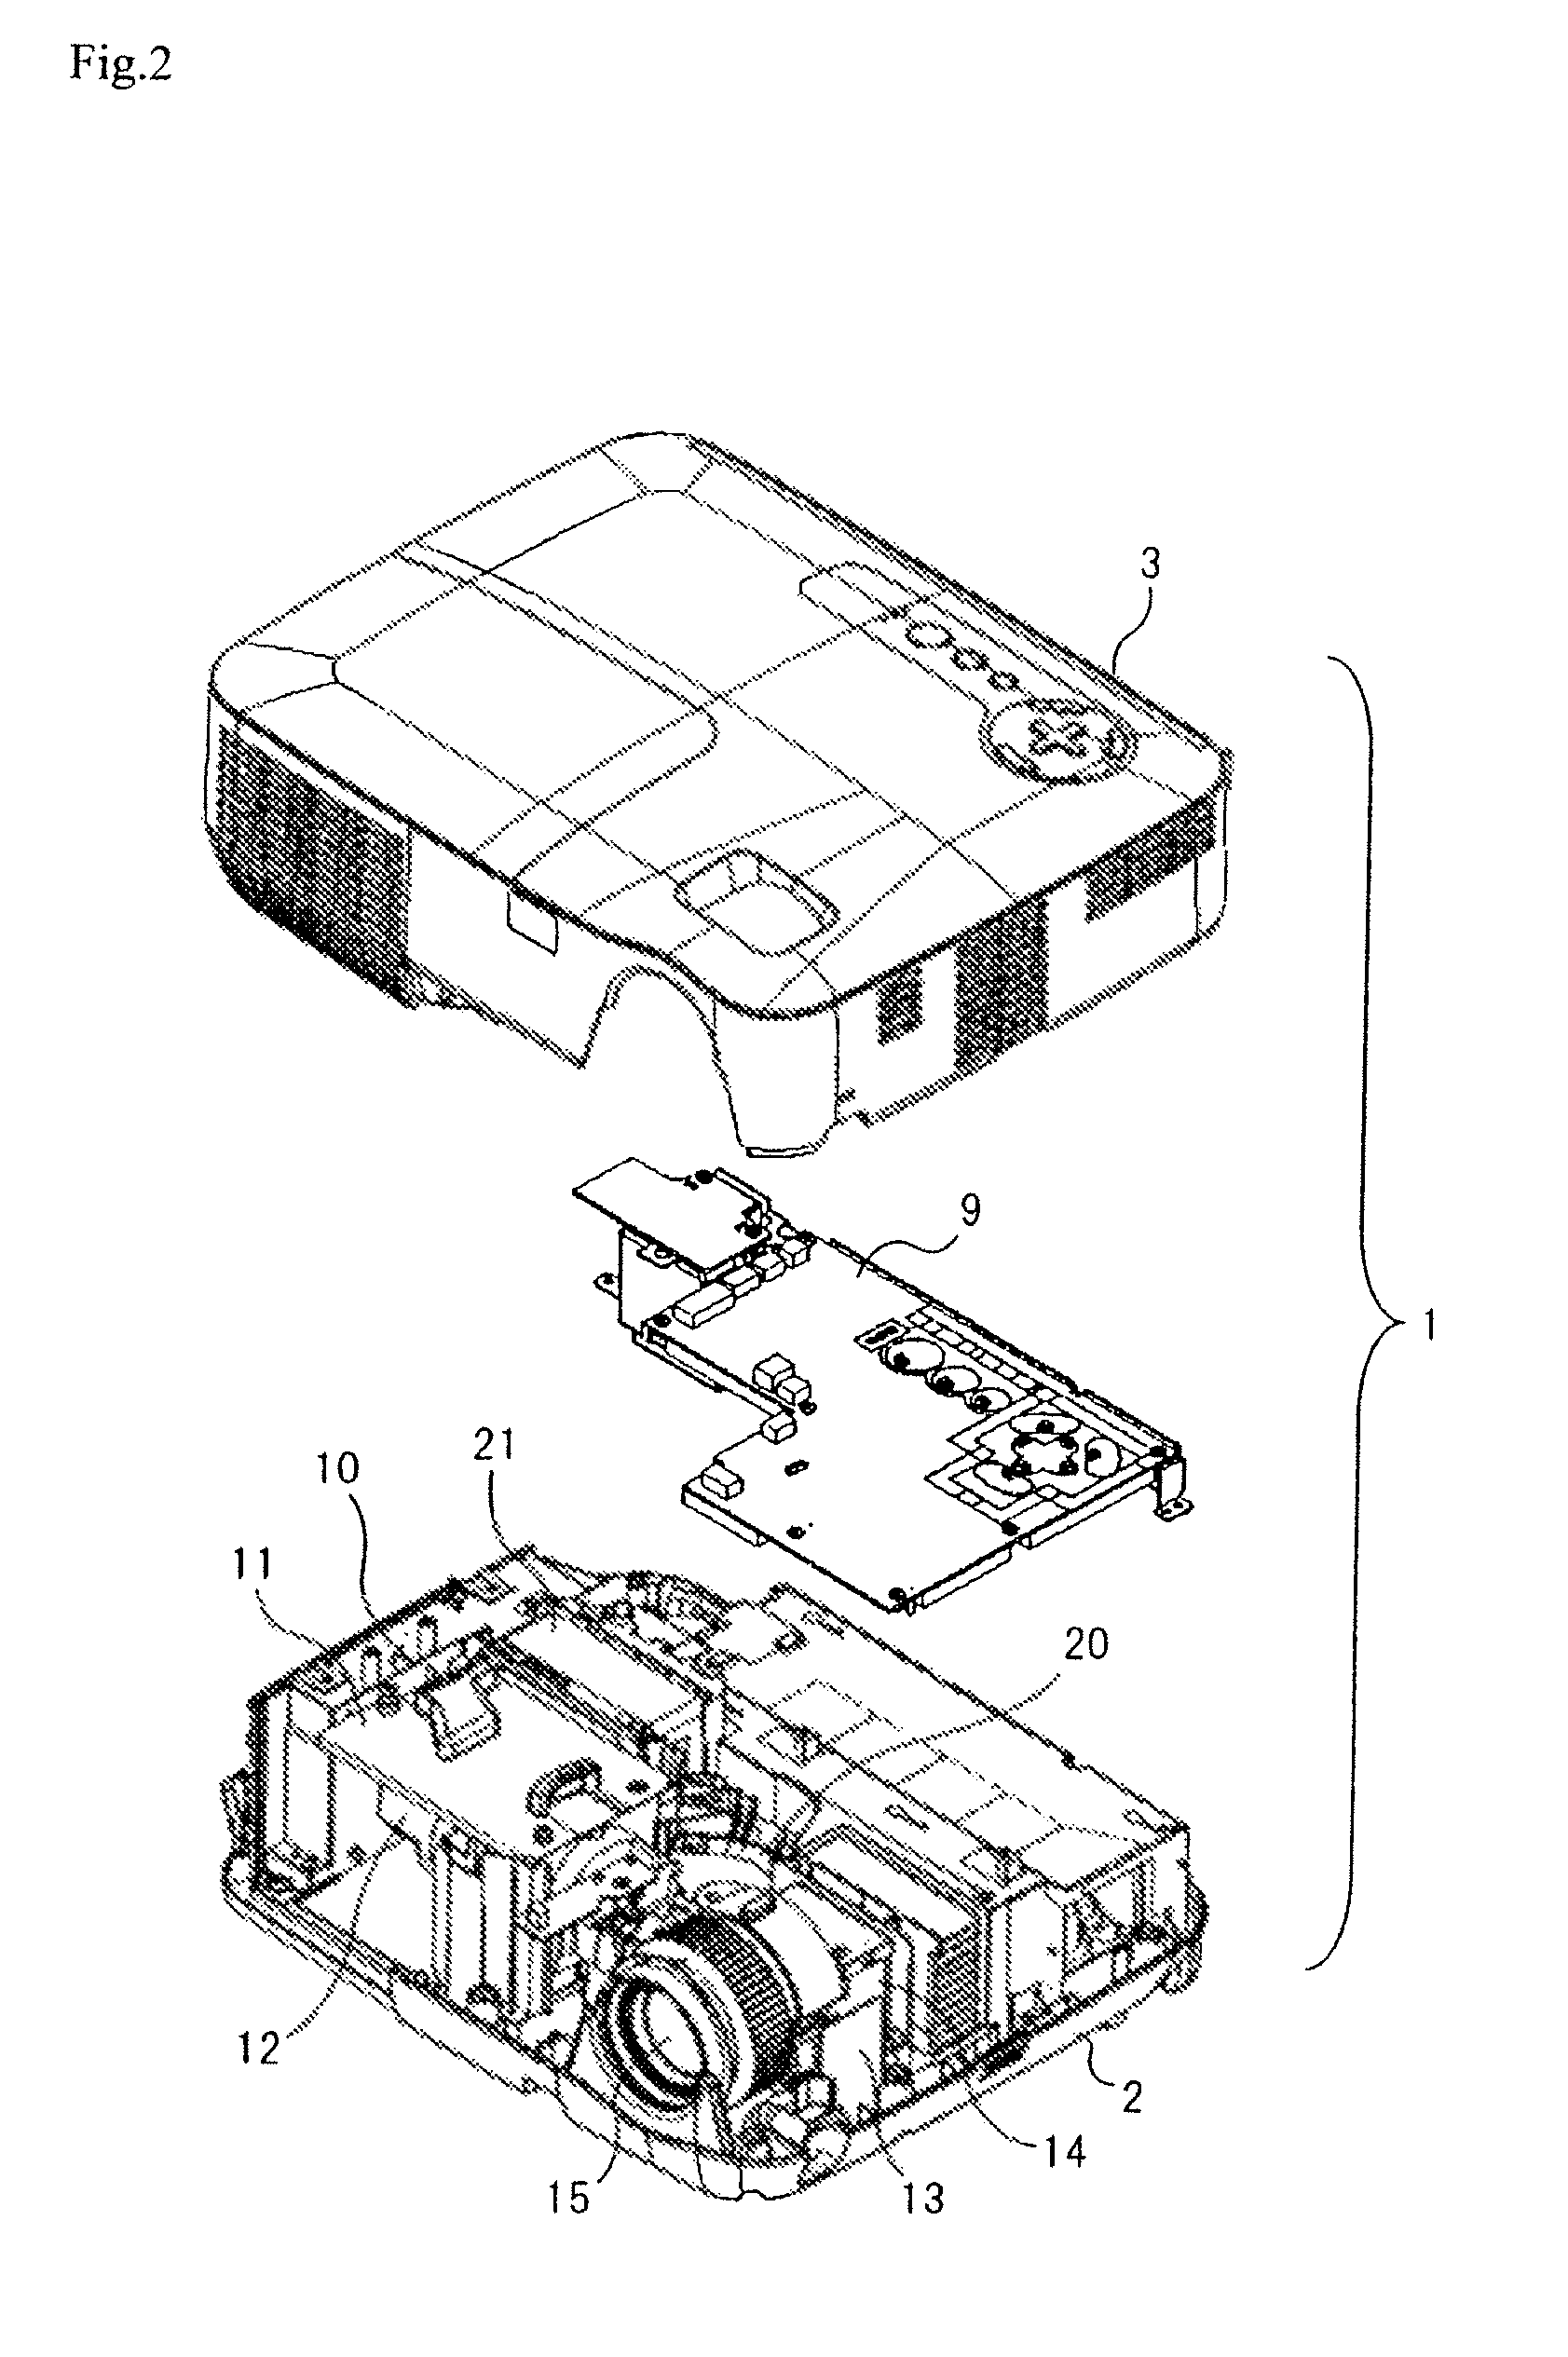 Projection display device comprising a light source